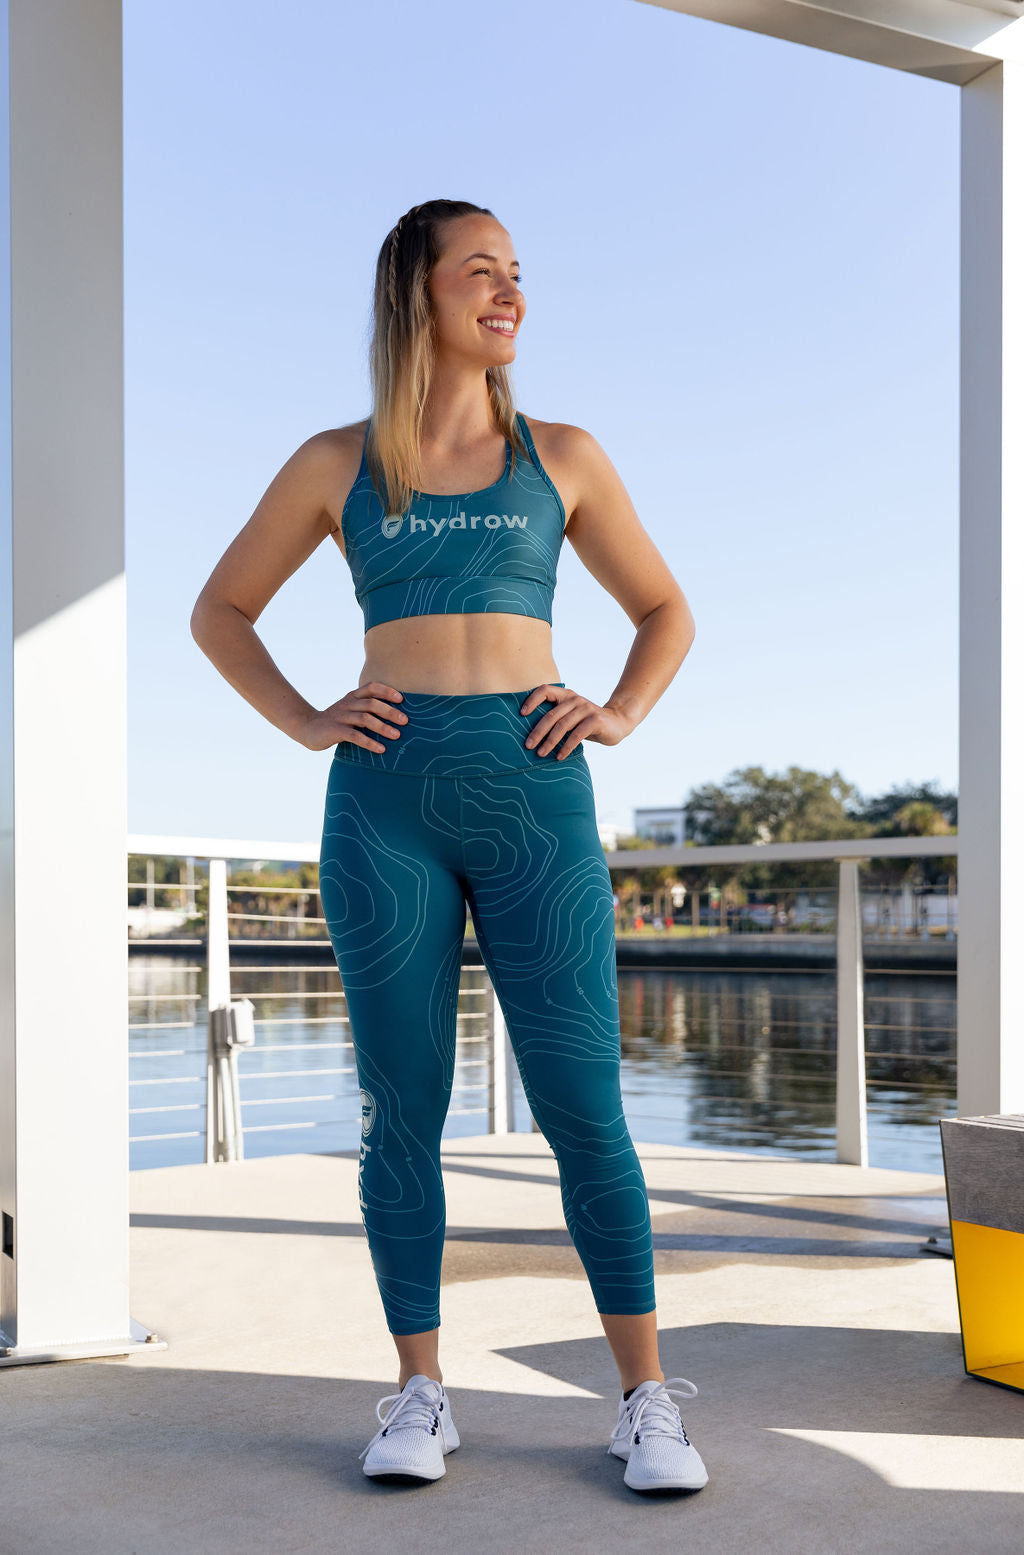 hydrow athlete wearing blue hydrow x Fabletics sports bra and blue hydrow x fabletics leggings